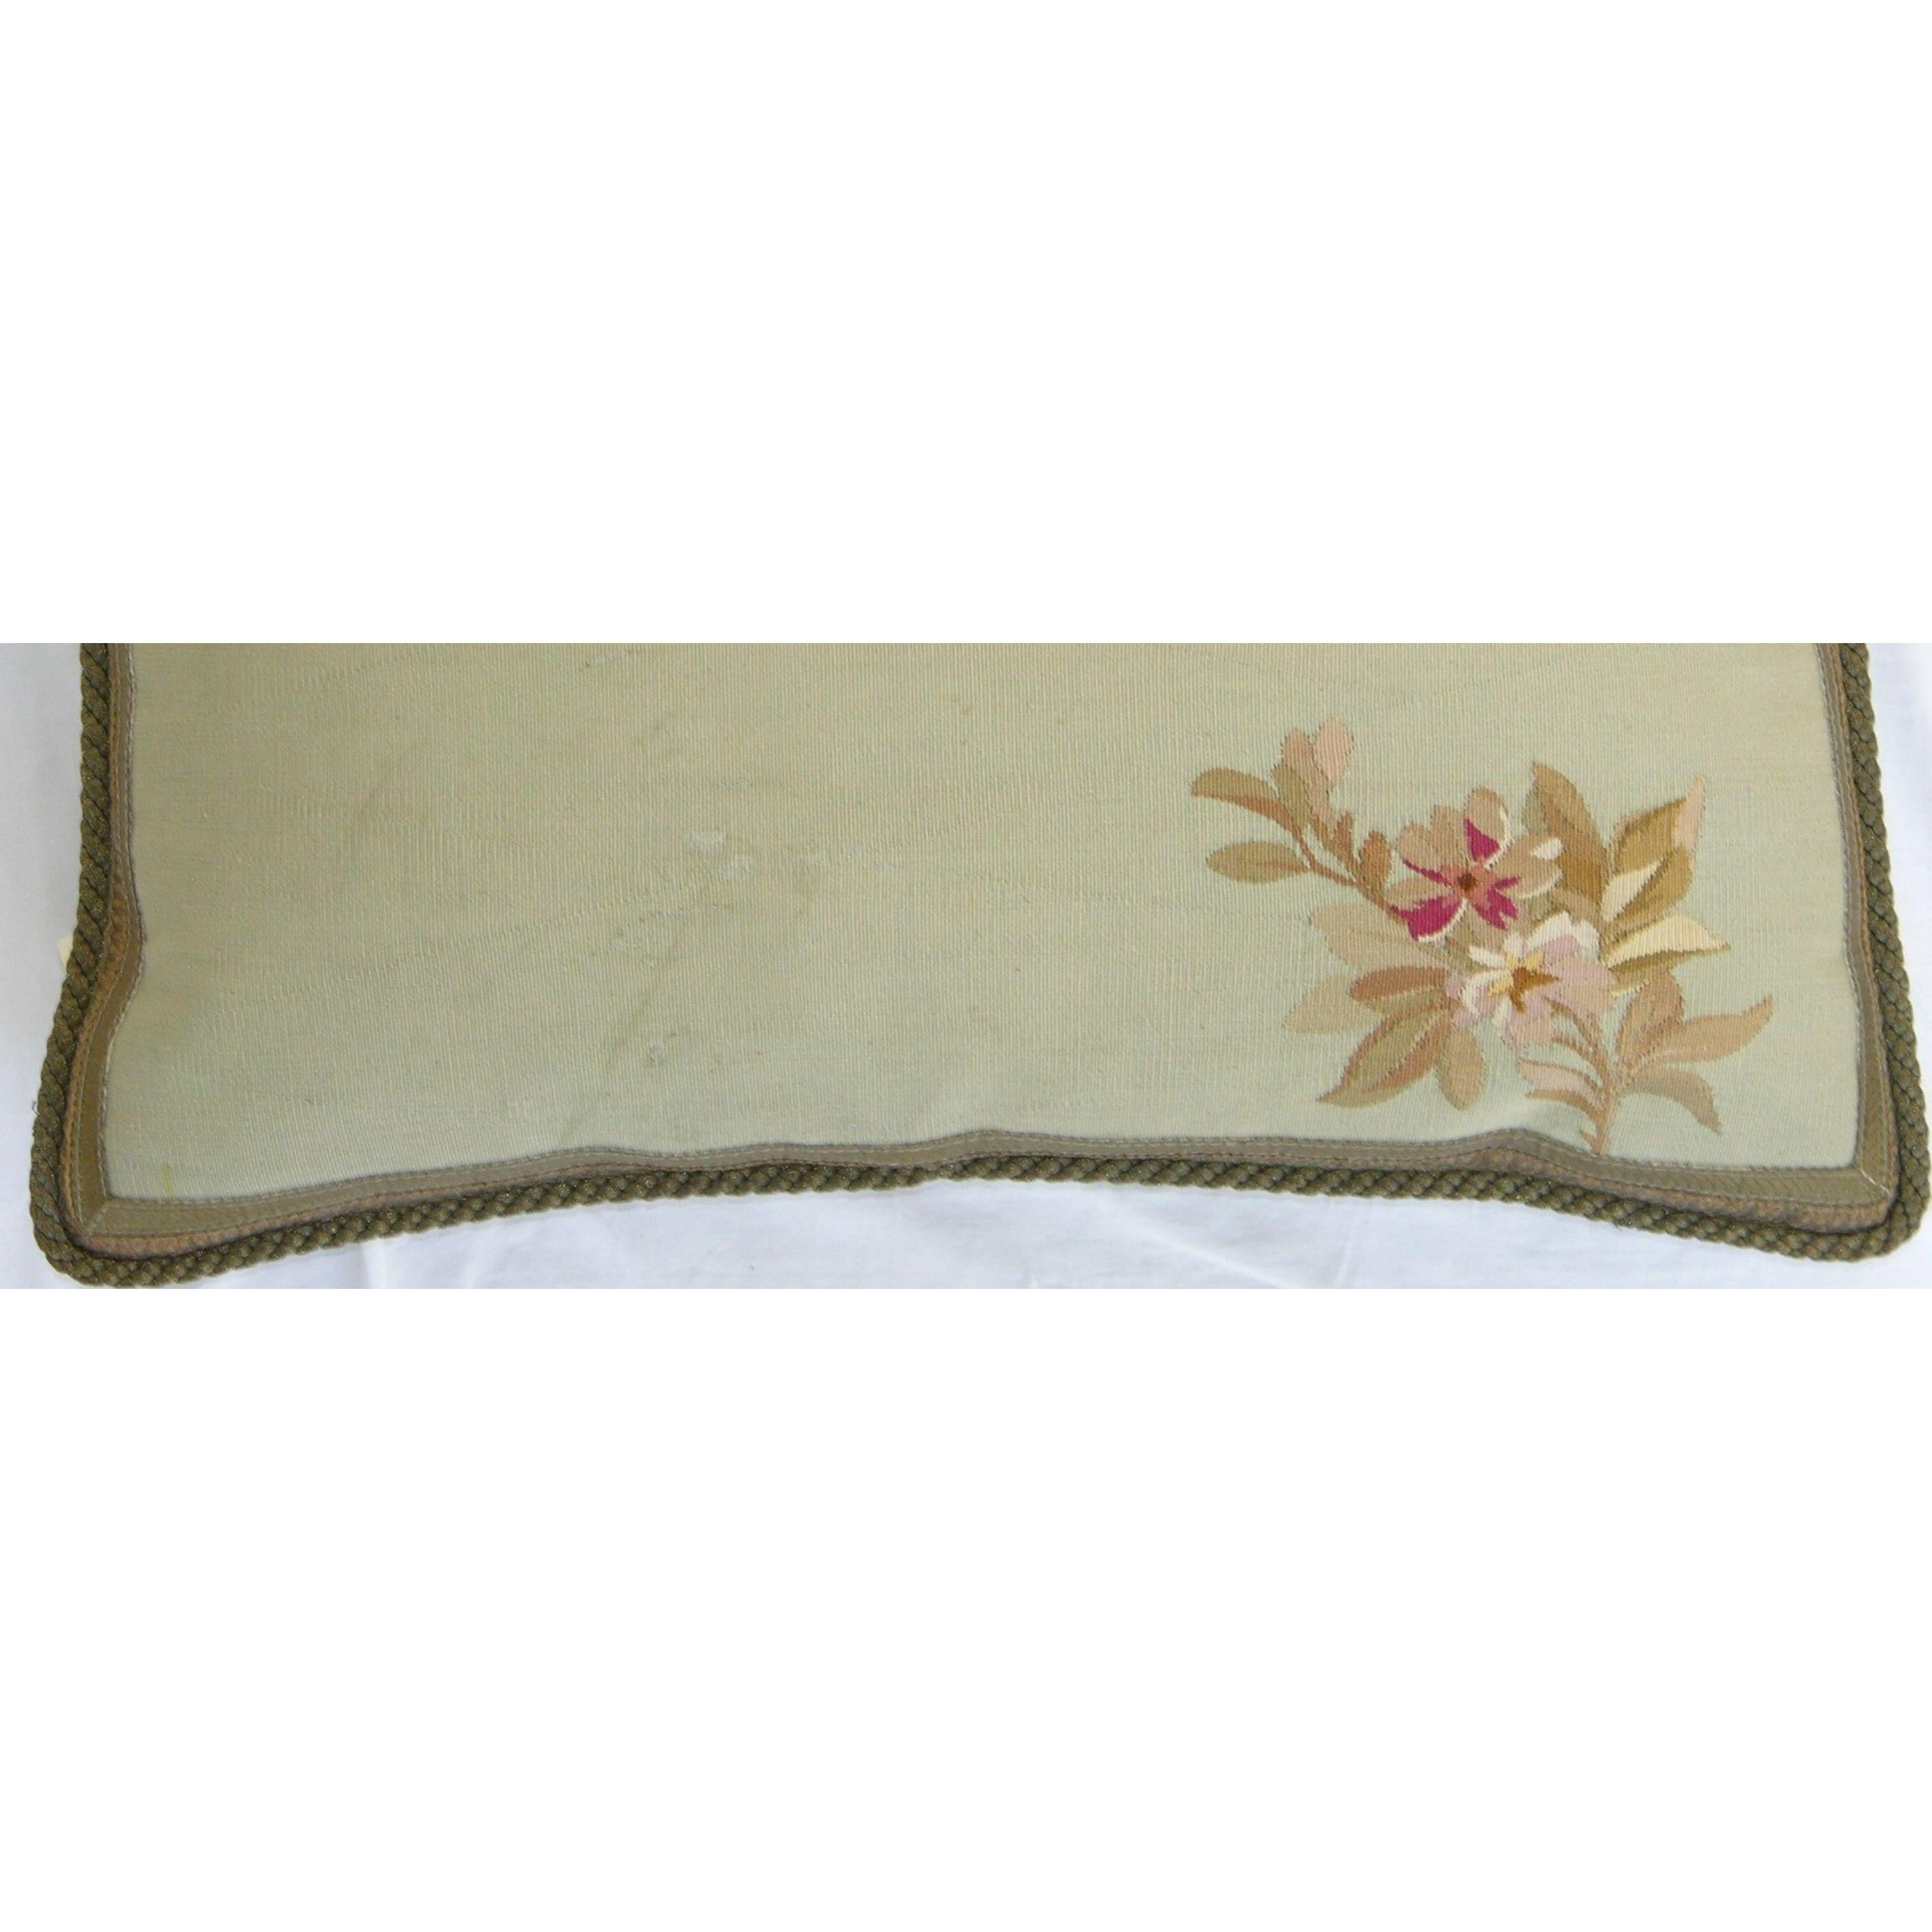 Circa 1860 Antique French Aubusson Tapestry Pillow In Good Condition For Sale In Los Angeles, US